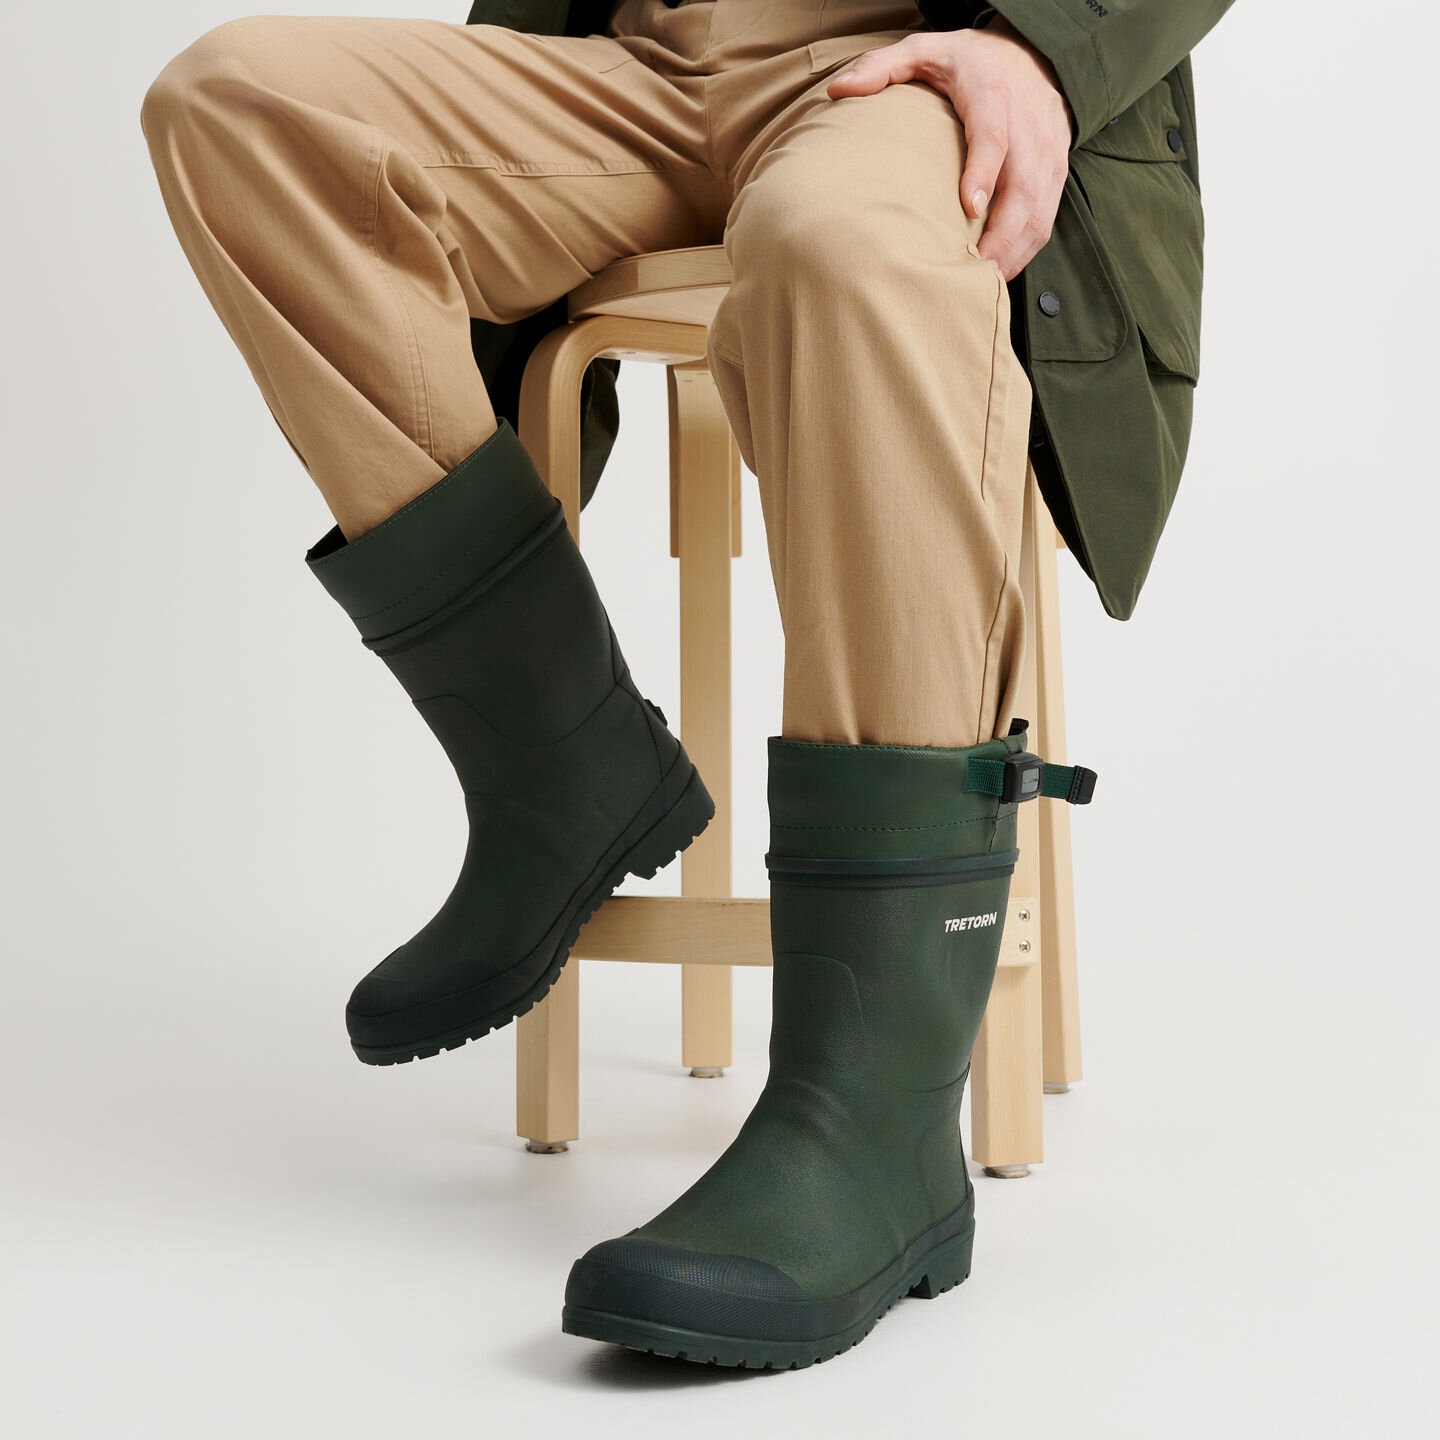 SCOUT S RUBBER BOOT